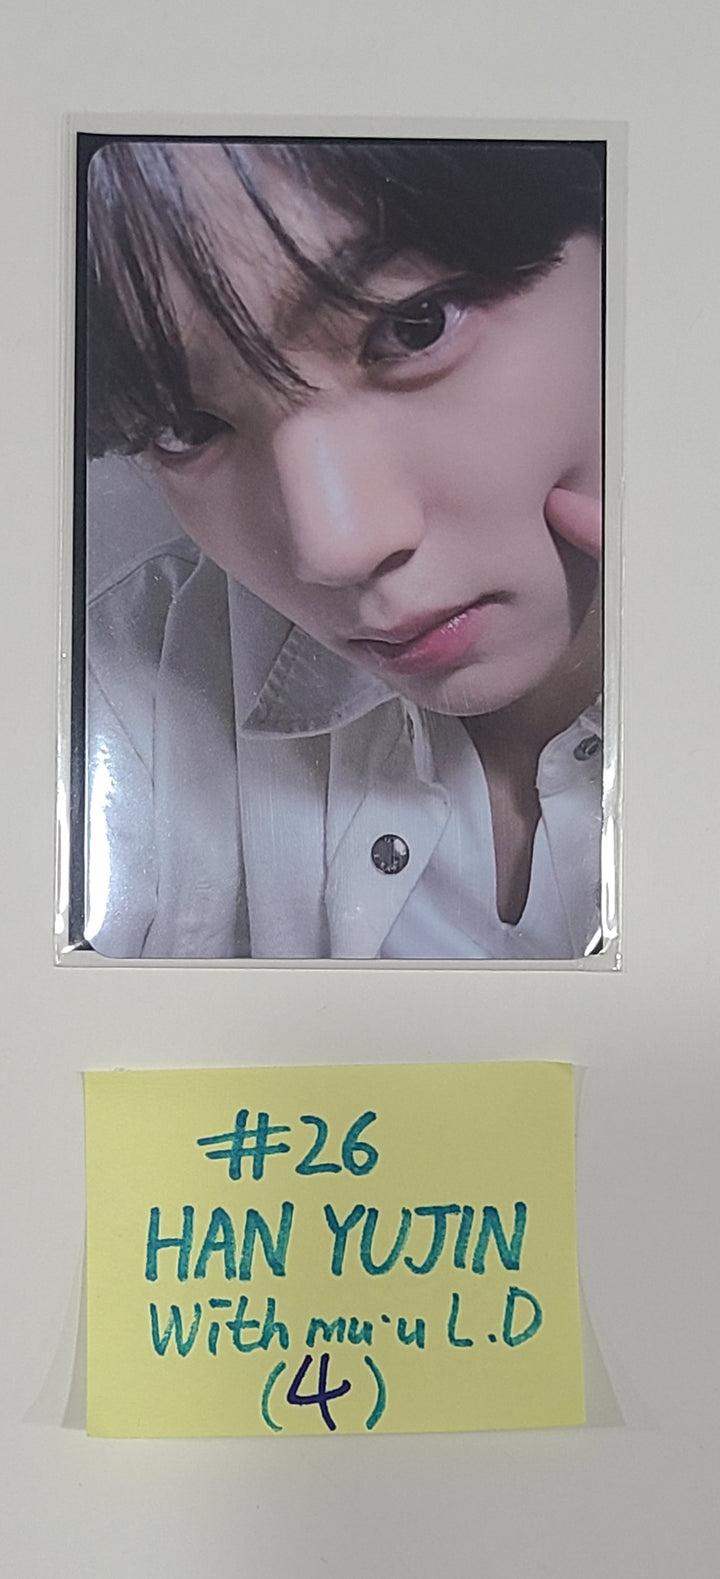 ZEROBASEONE (ZB1) "YOUTH IN THE SHADE" - Withmuu Lucky Draw Event PVC Photocard